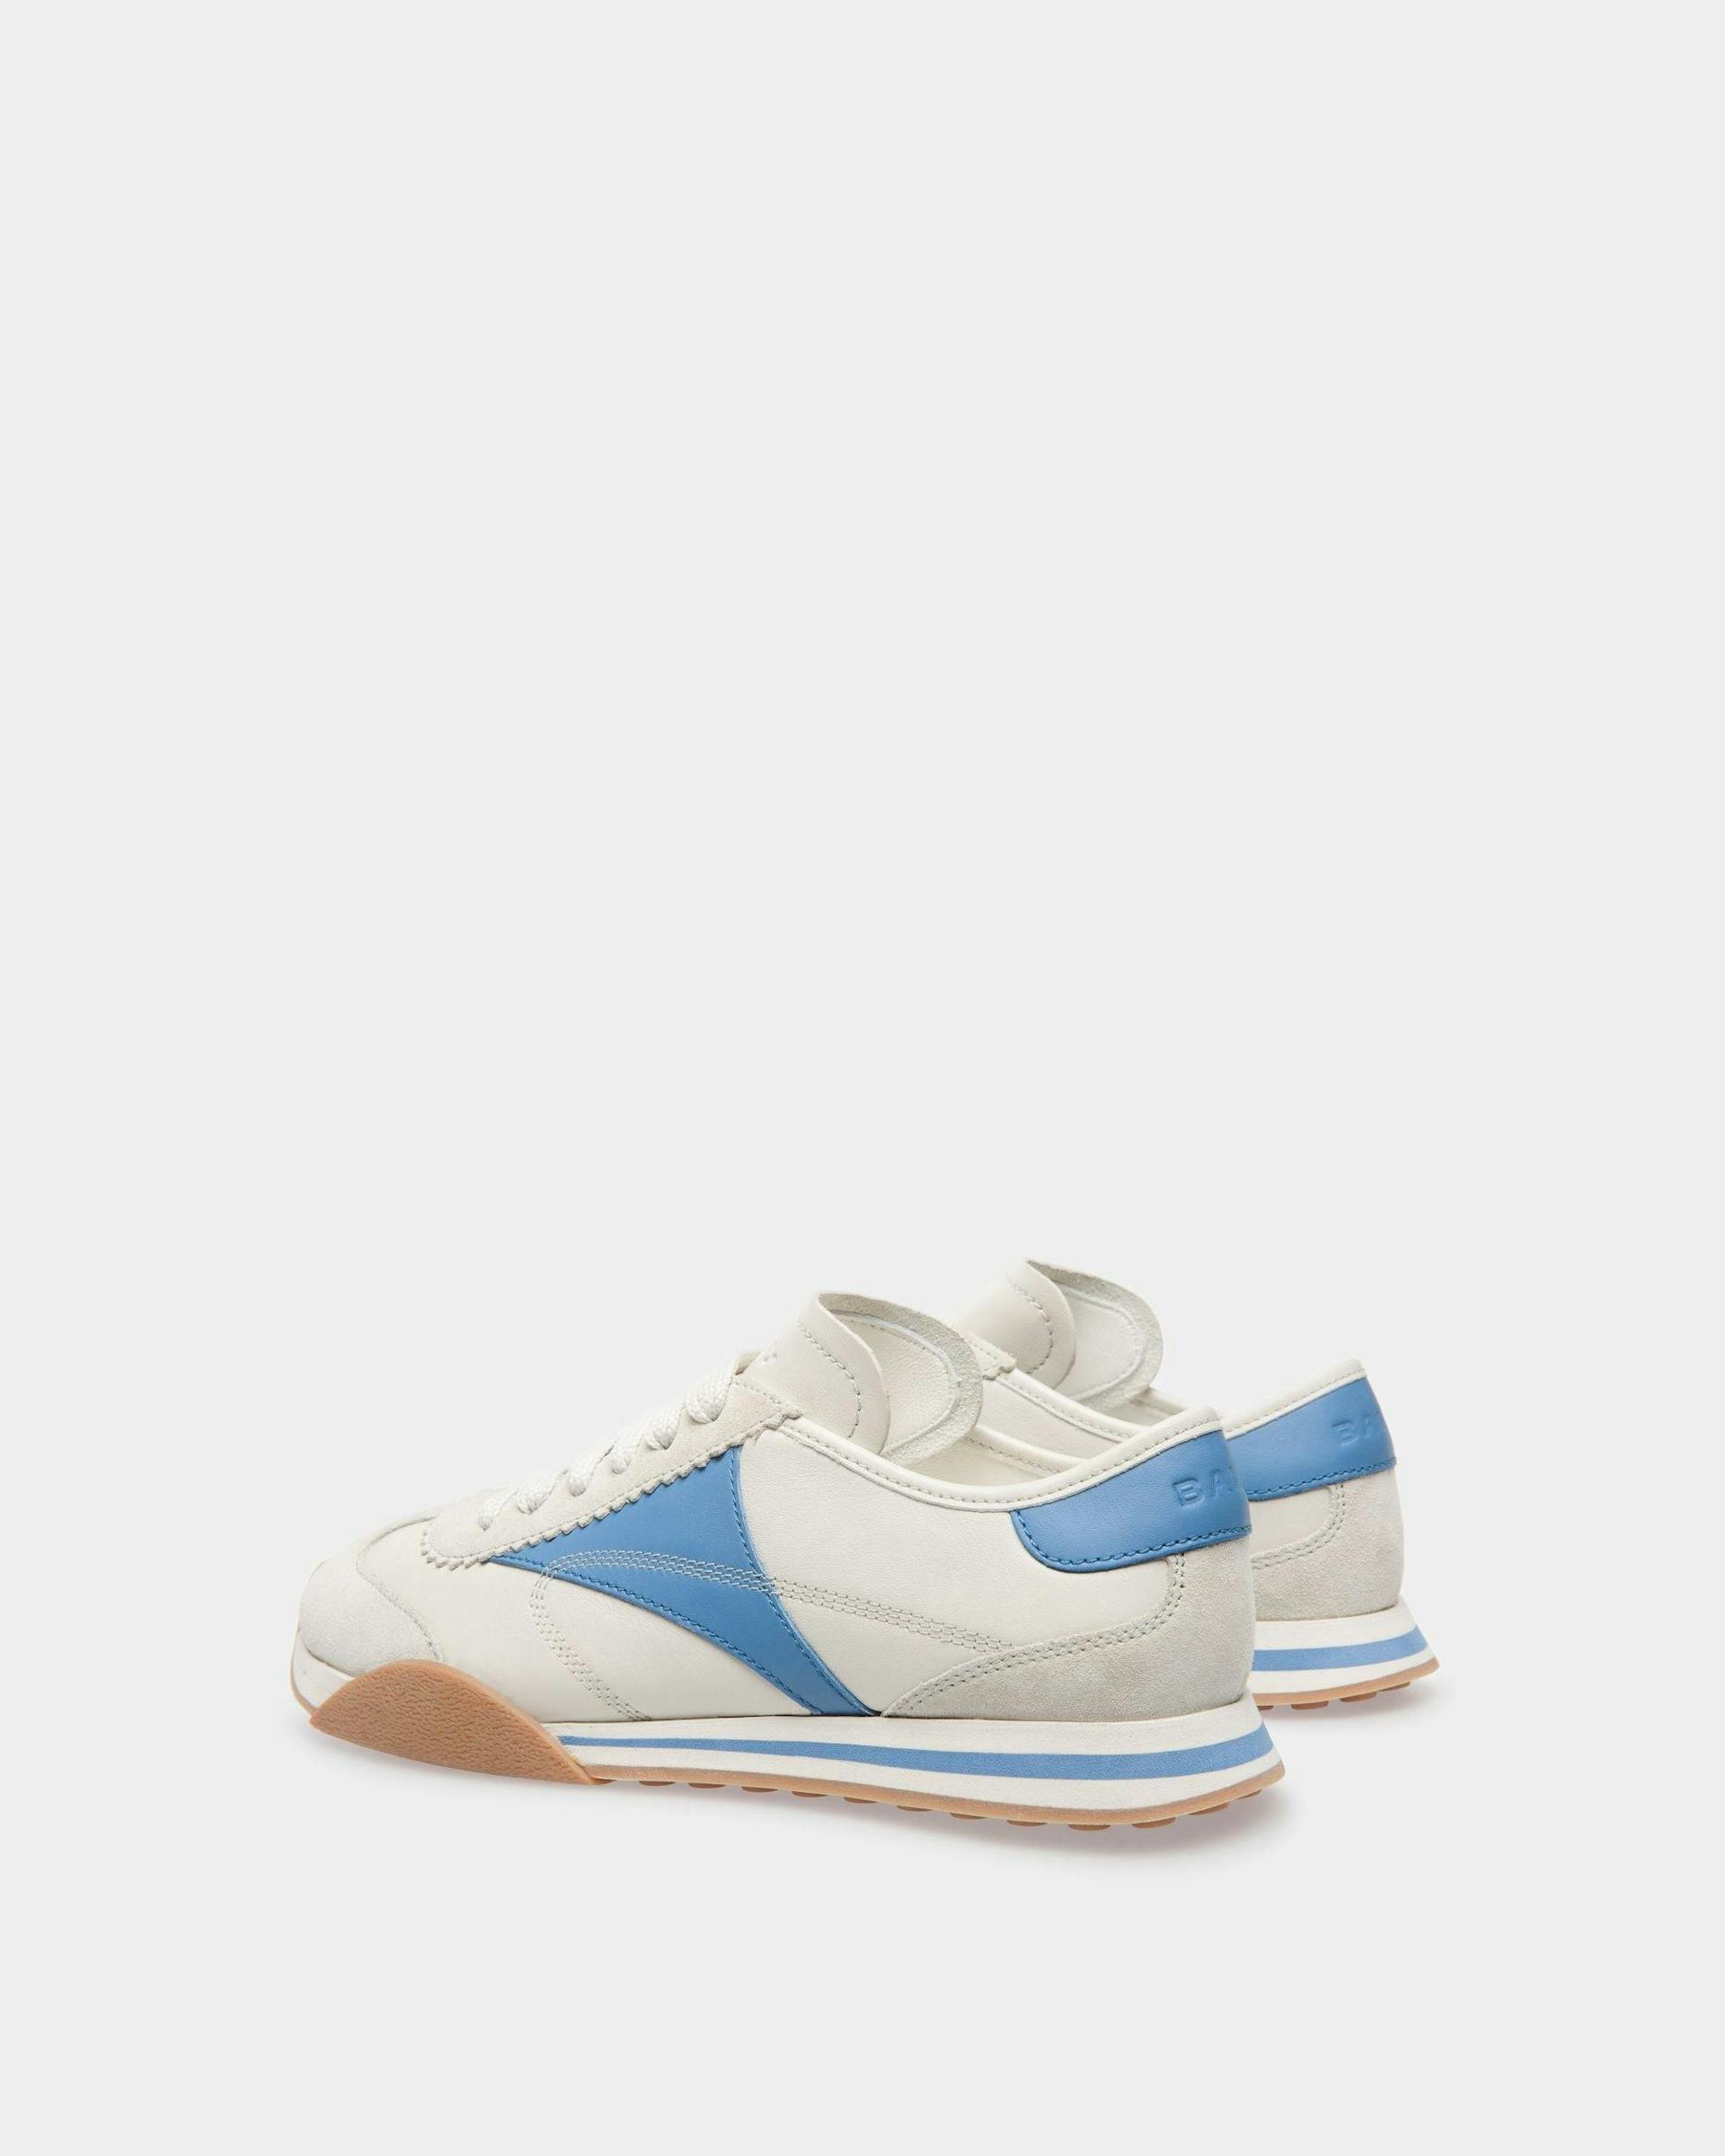 Women's Sussex Sneakers In Dusty White And Blue Leather | Bally | Still Life 3/4 Back